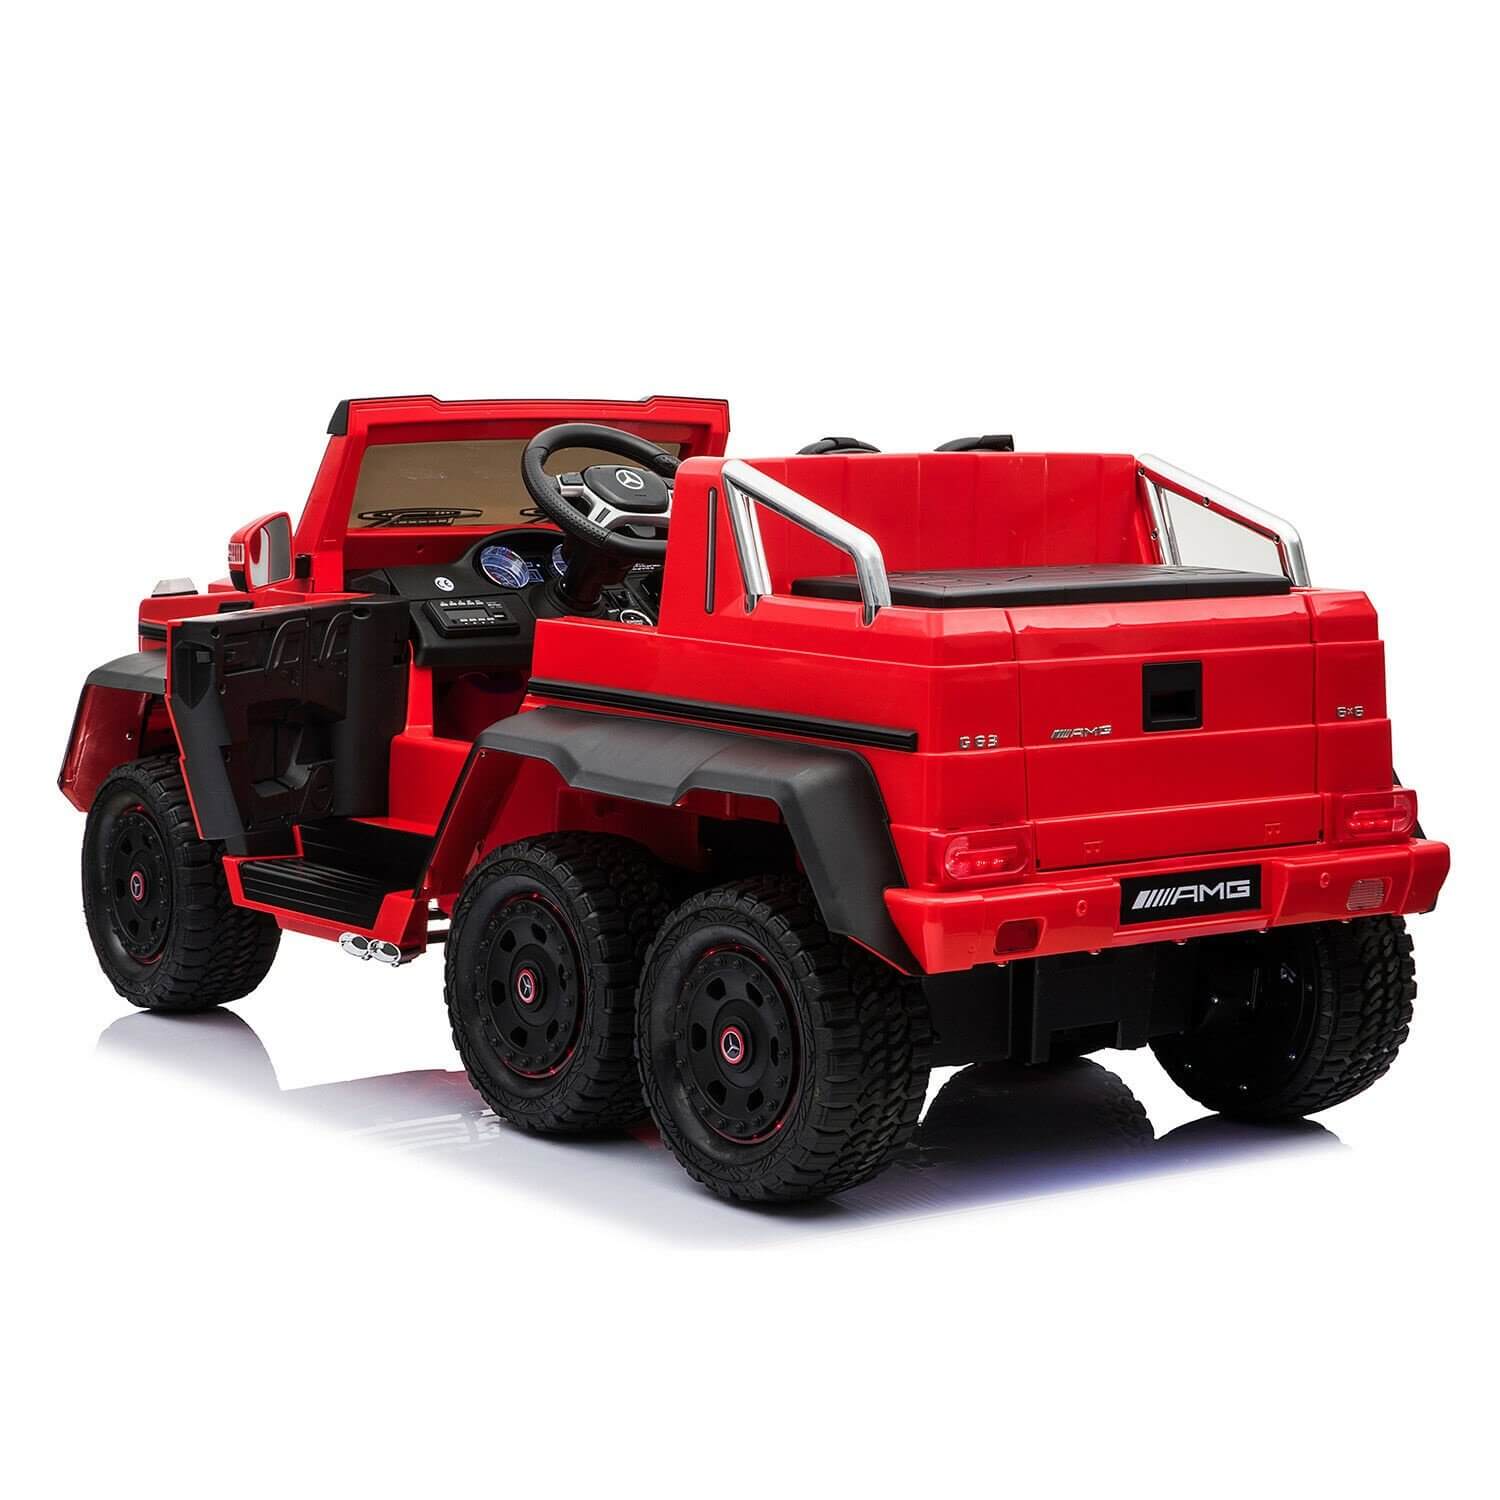 Red Mercedes Benz G63 Ride On Toy Car 12V For Kids 6x6